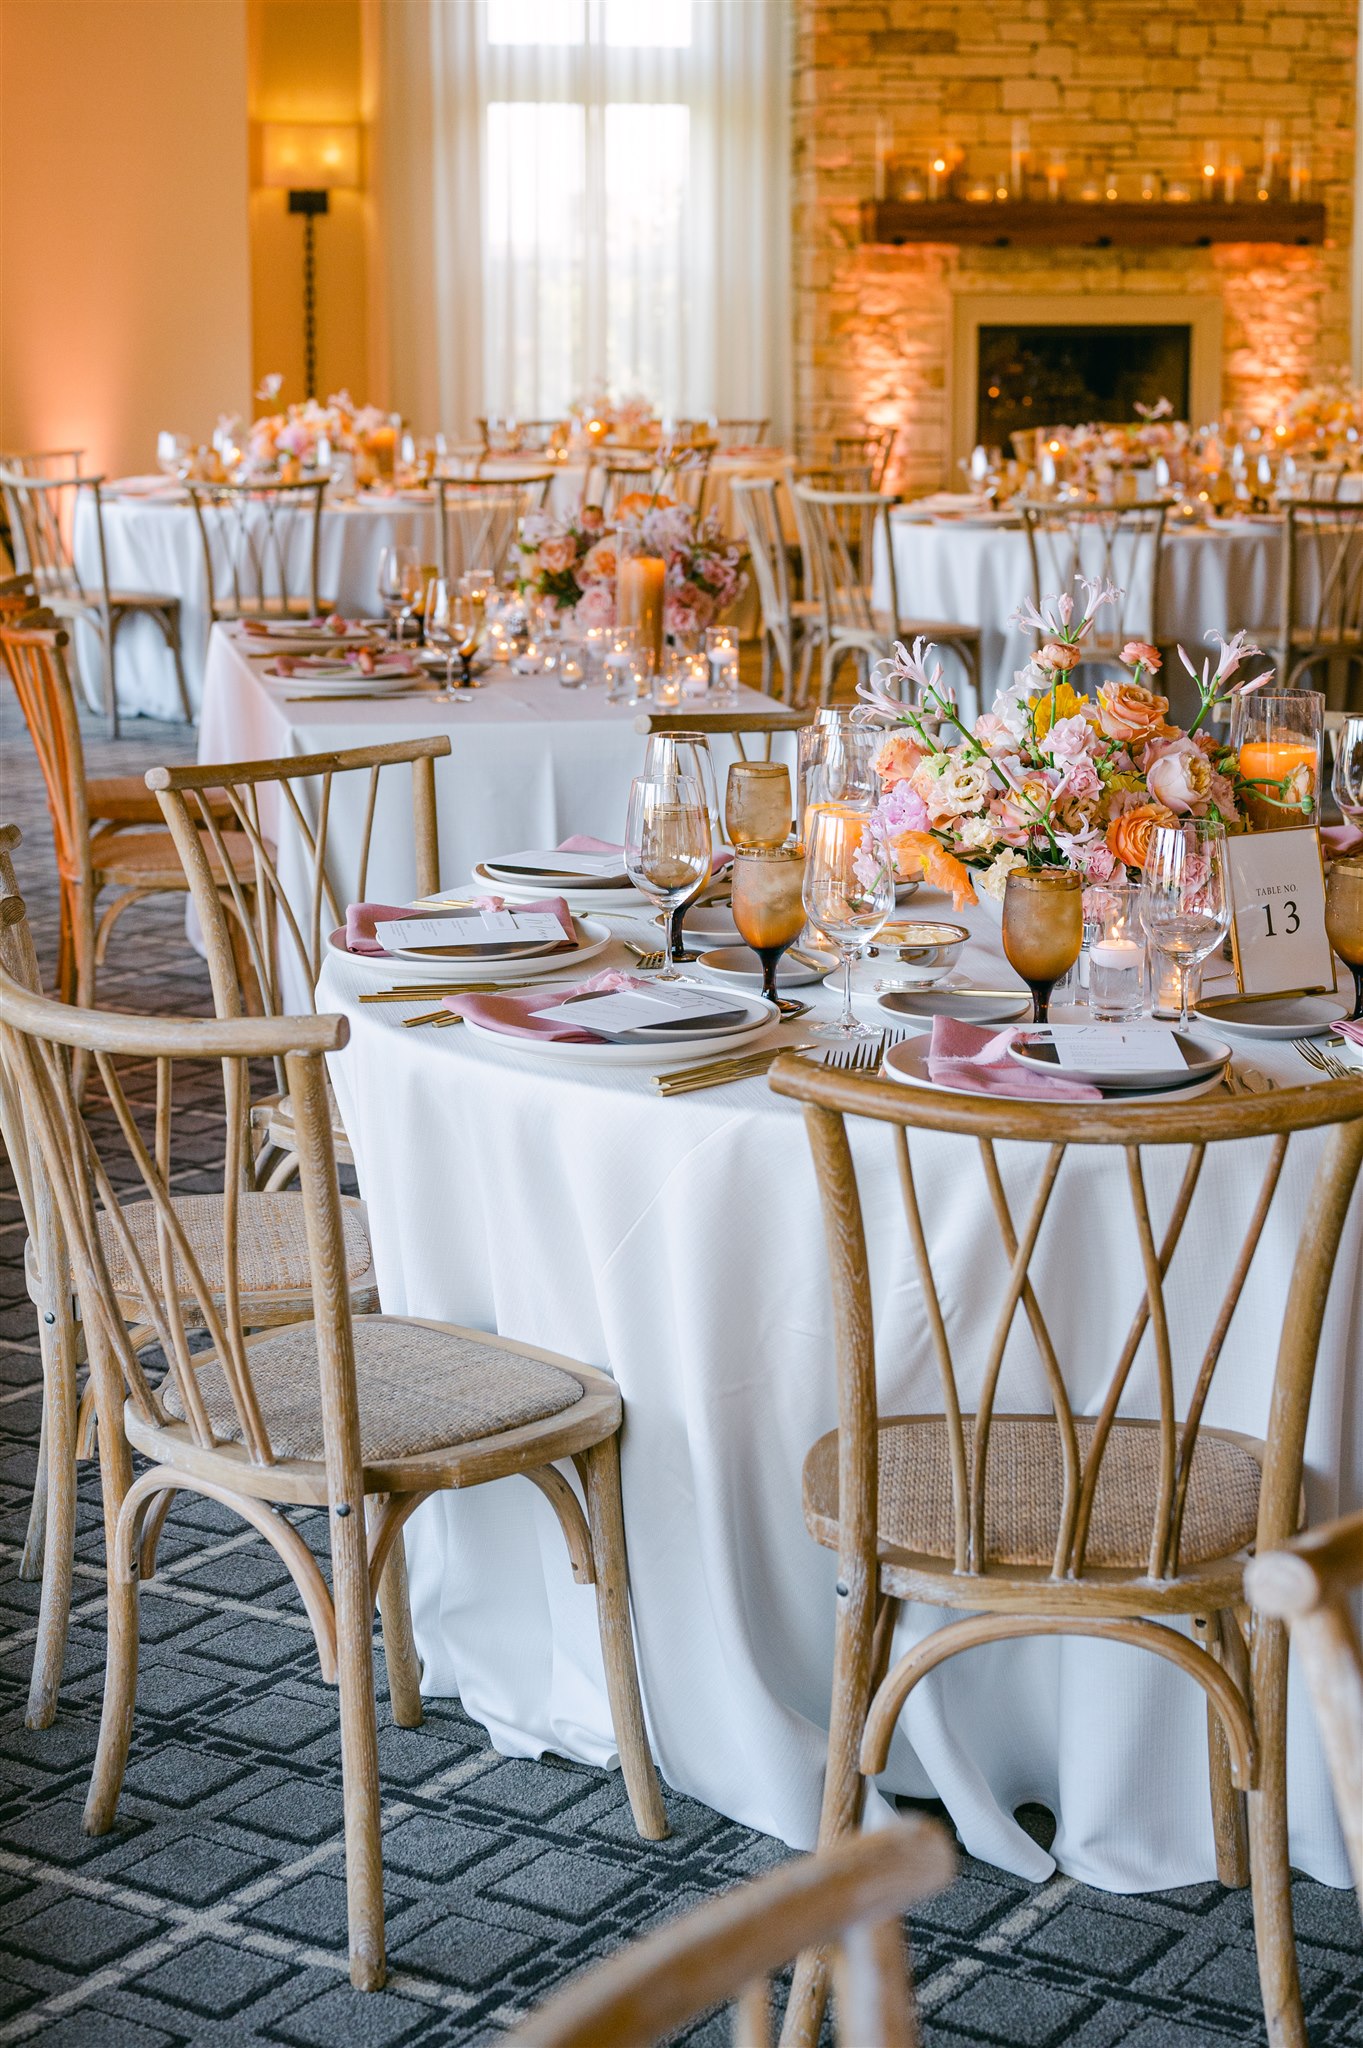 peach pink coral white delicate floral arrangement coral pillar candles clear glass candle votives with gold rim white clean table cloth simple stone dinner plates wedding reception wooden and rattan dining chairs gold framed simple table numbers smoked amber glassware pink napkin